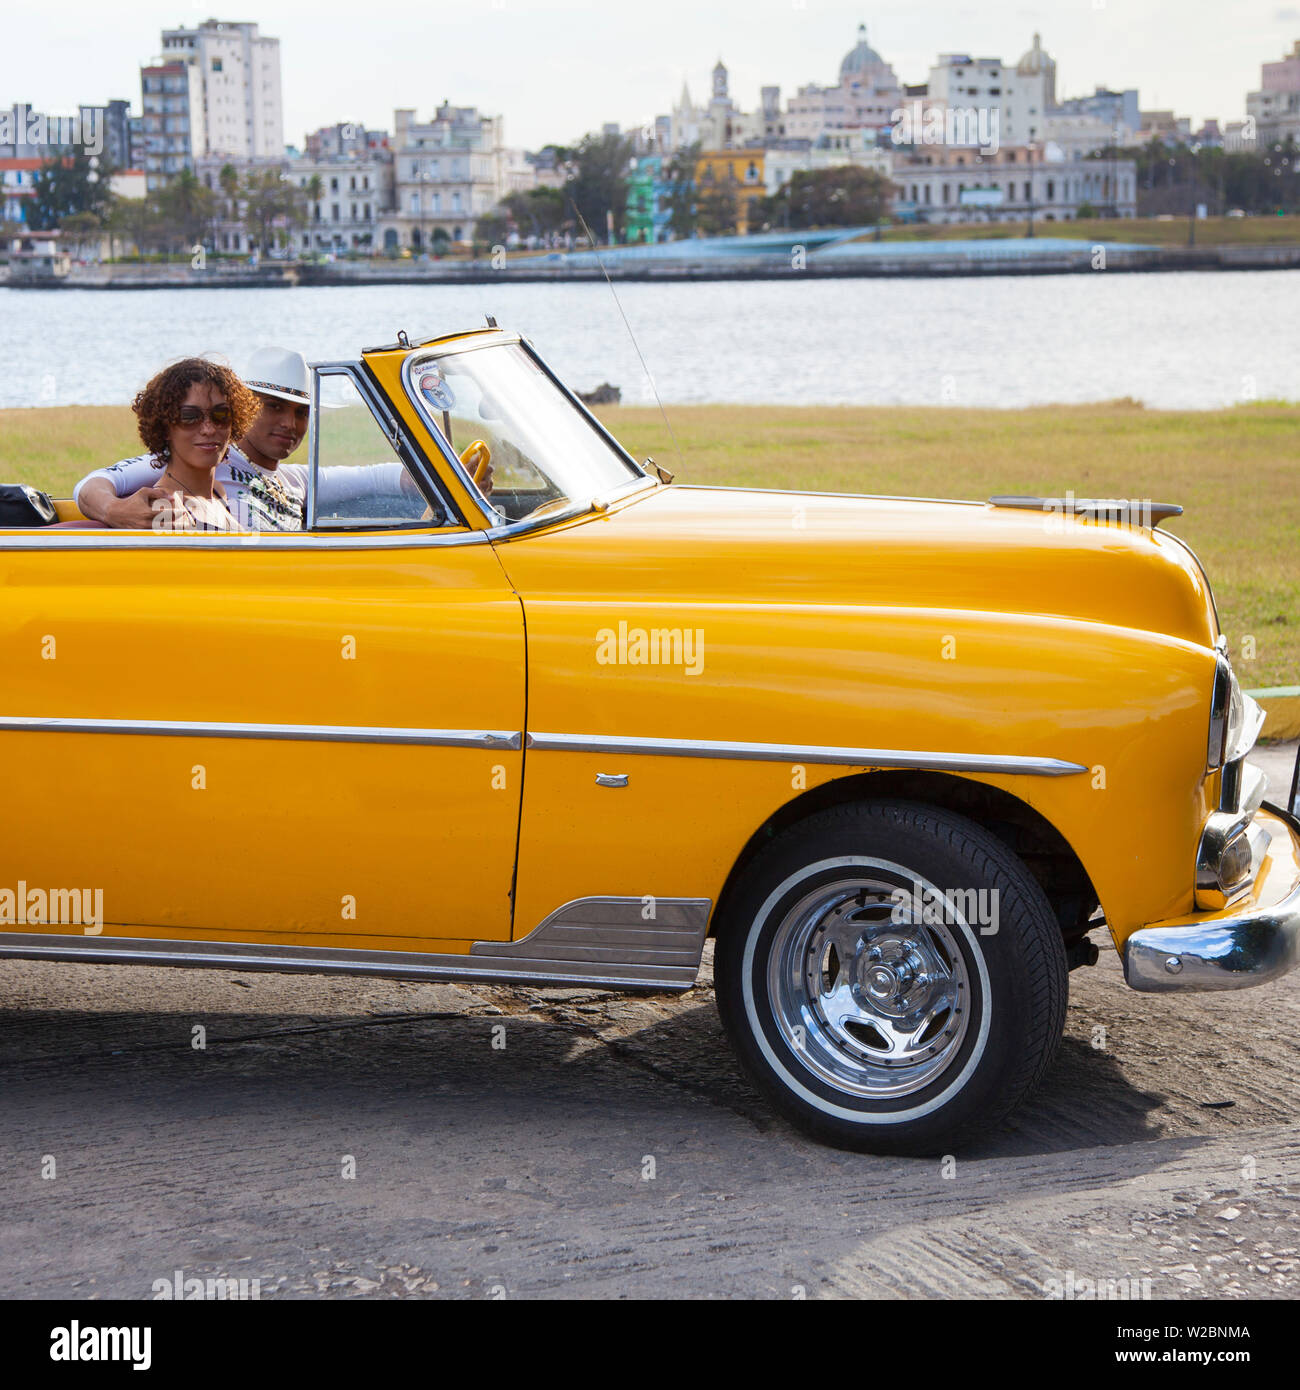 Young couple in a Classic 50's Chevrolet, Havana, Cuba (MR) Stock Photo